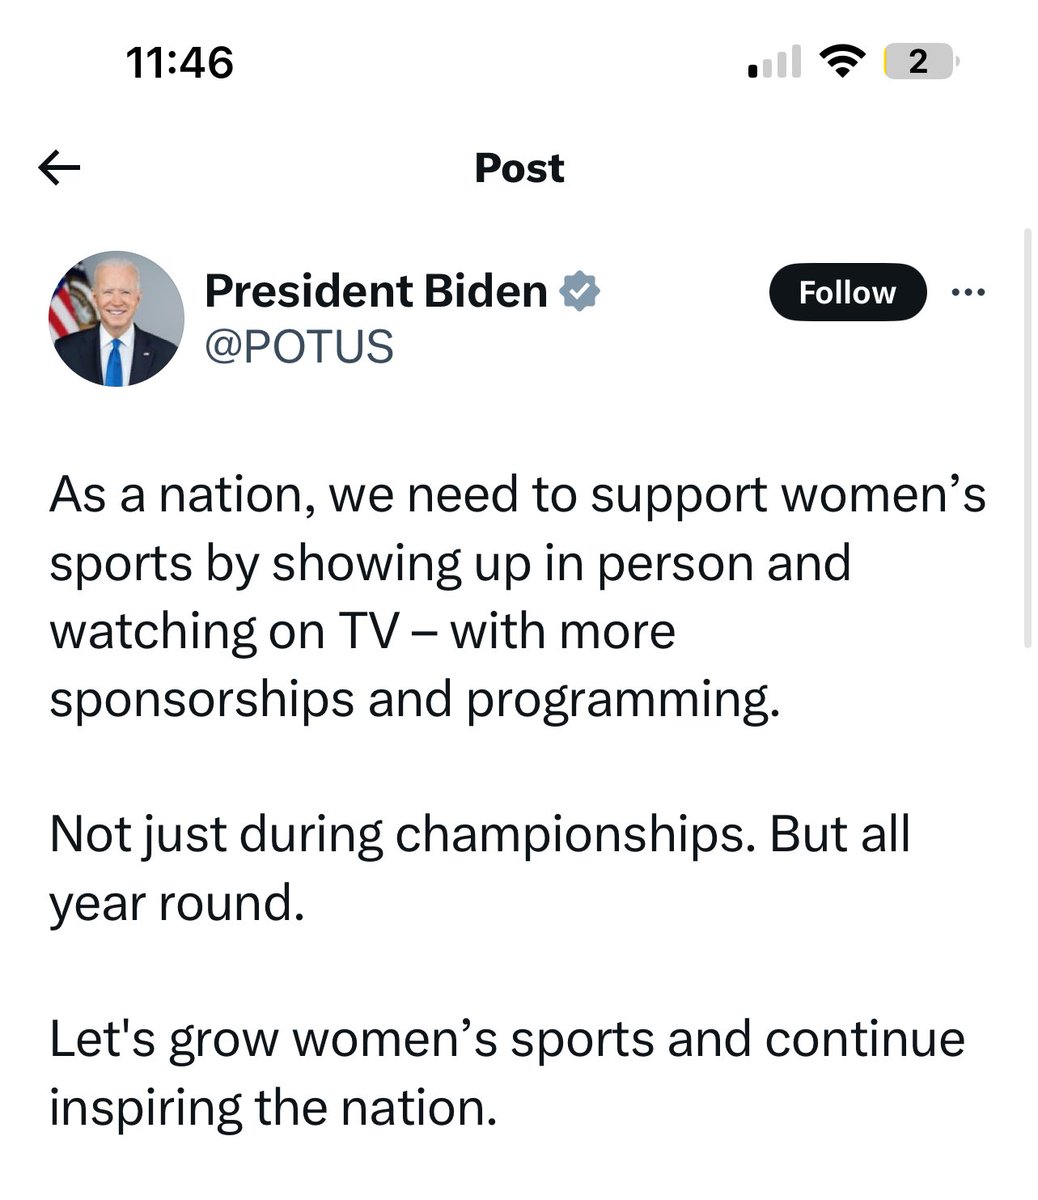 The easiest way to support women's sports is to keep men out of them. Biden and his admin are virtue-signaling sellouts pandering to get votes and it's obvious to anyone with any amount of brain activity